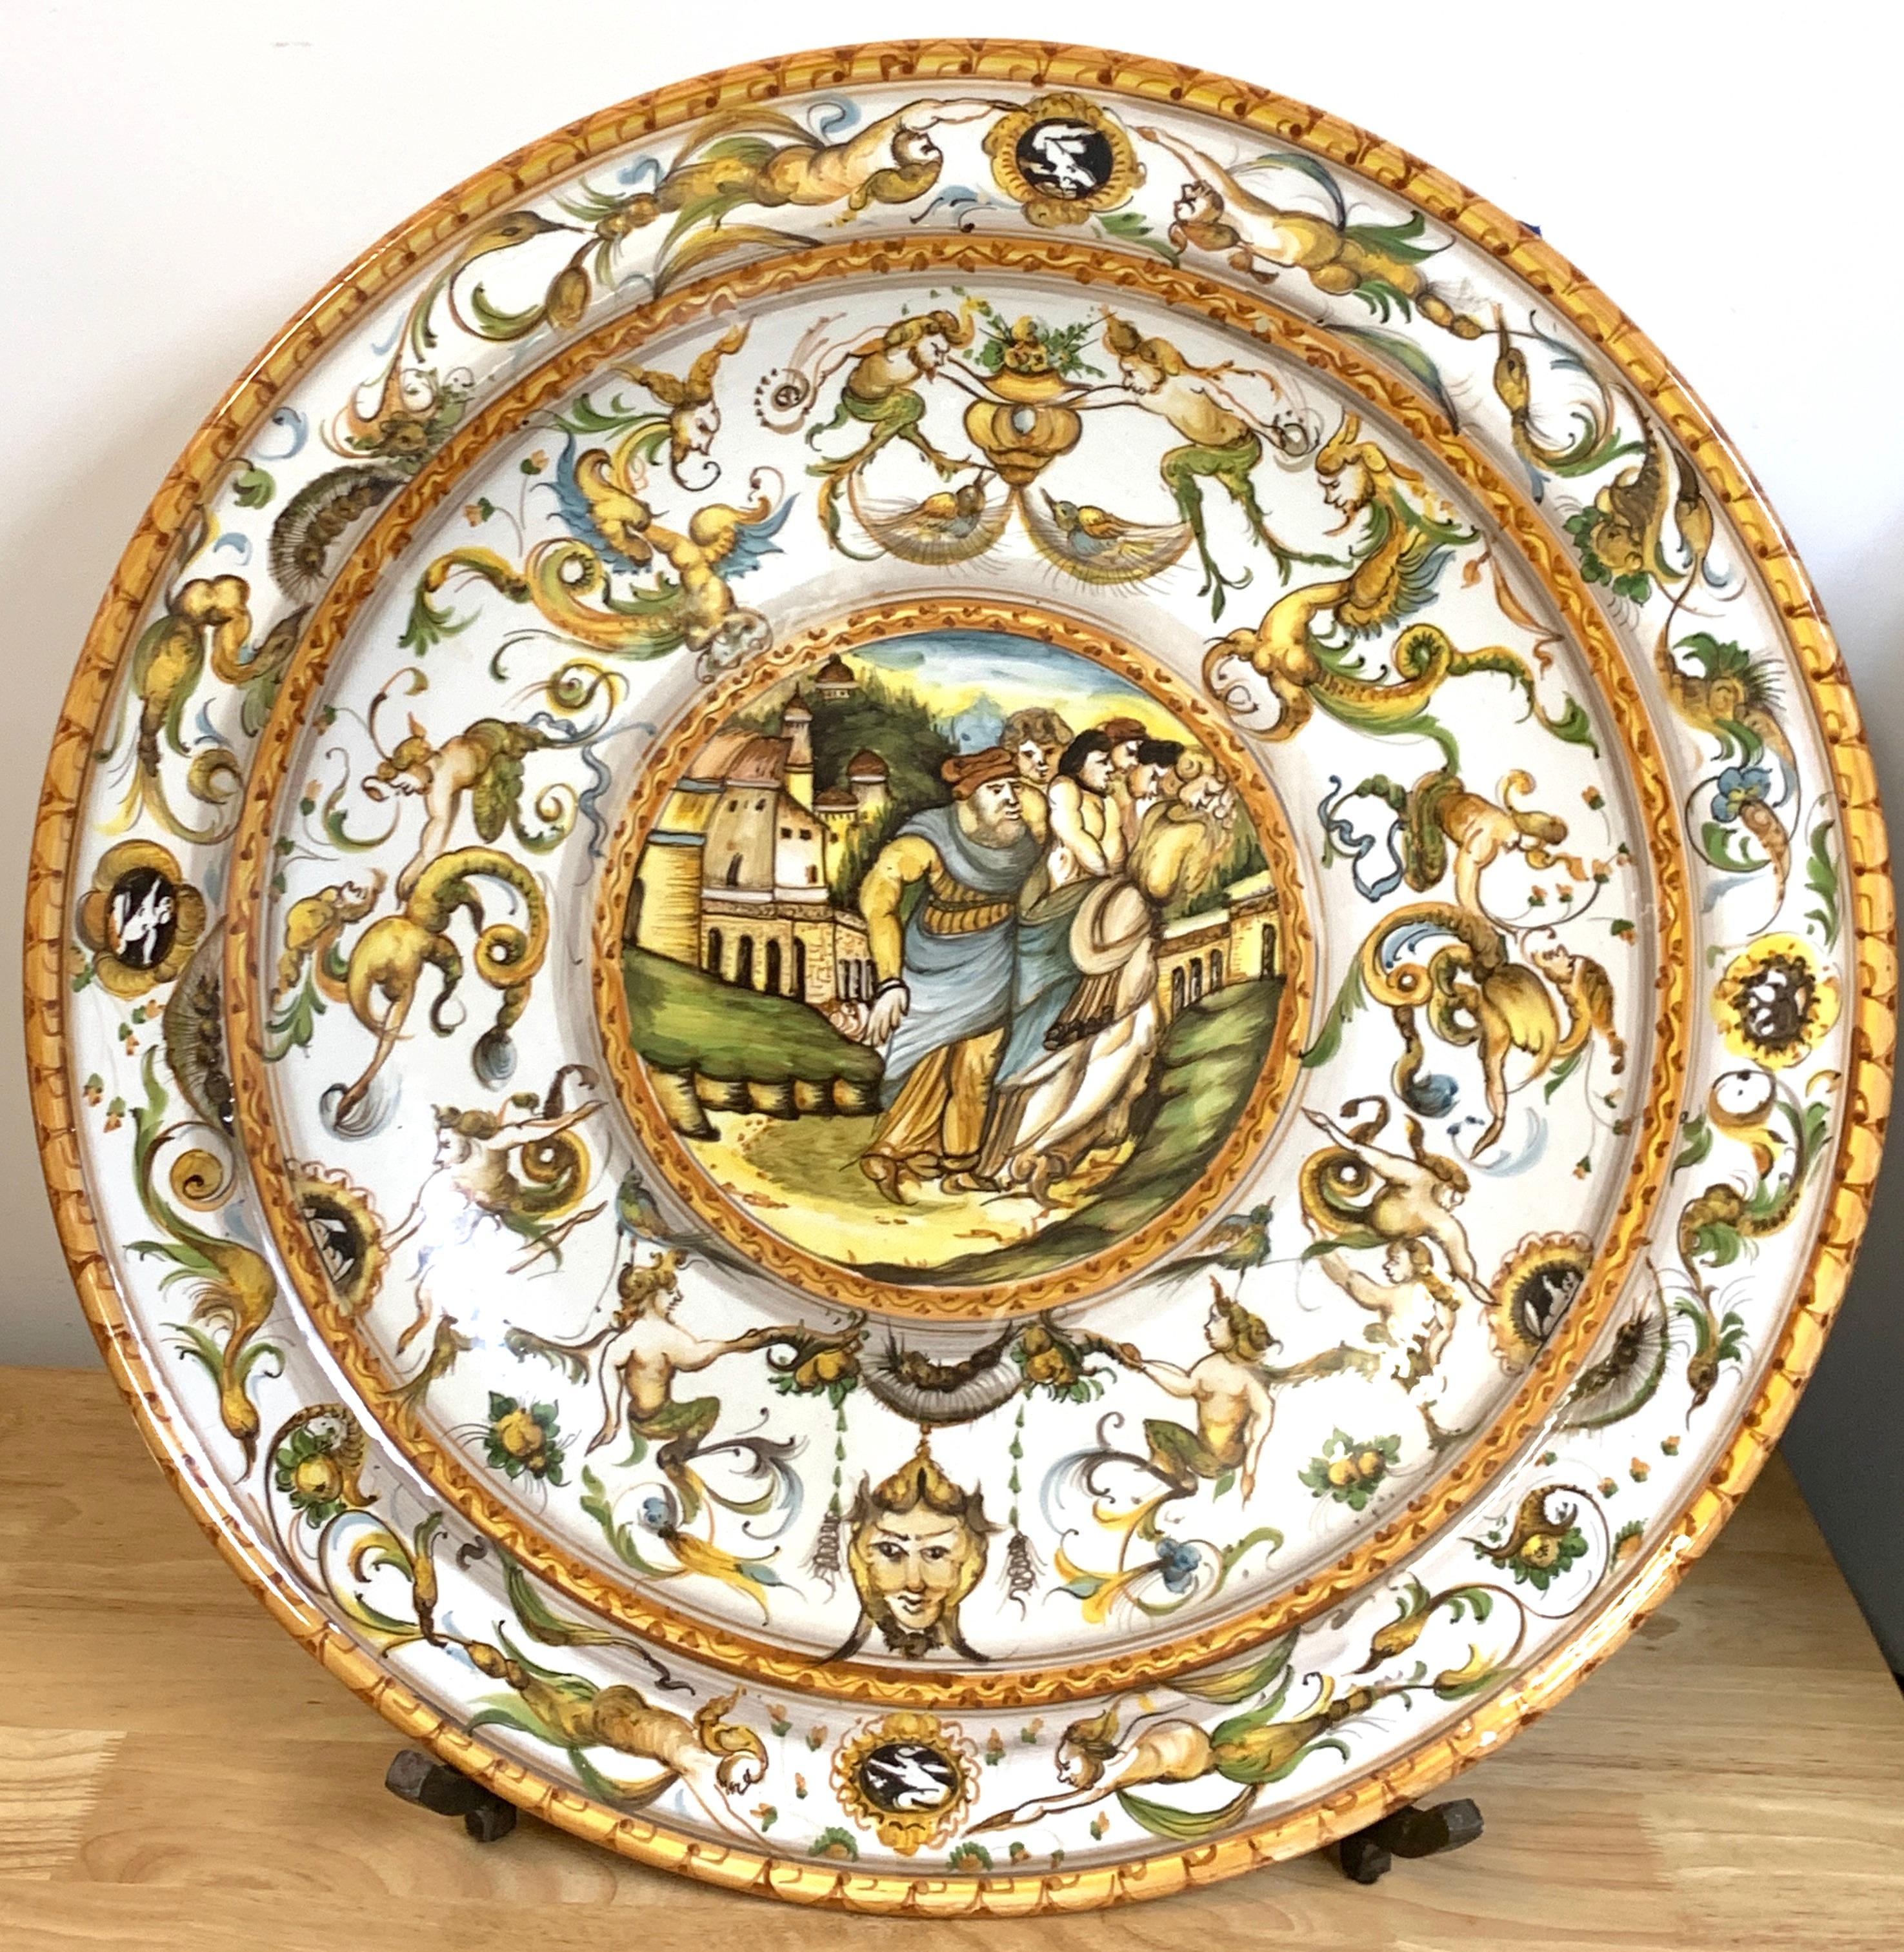 Massive Italian Majolica allegorical charger by A. Deruta
Gorgeous continuous Italian Renaissance style decoration
Ready to hang.